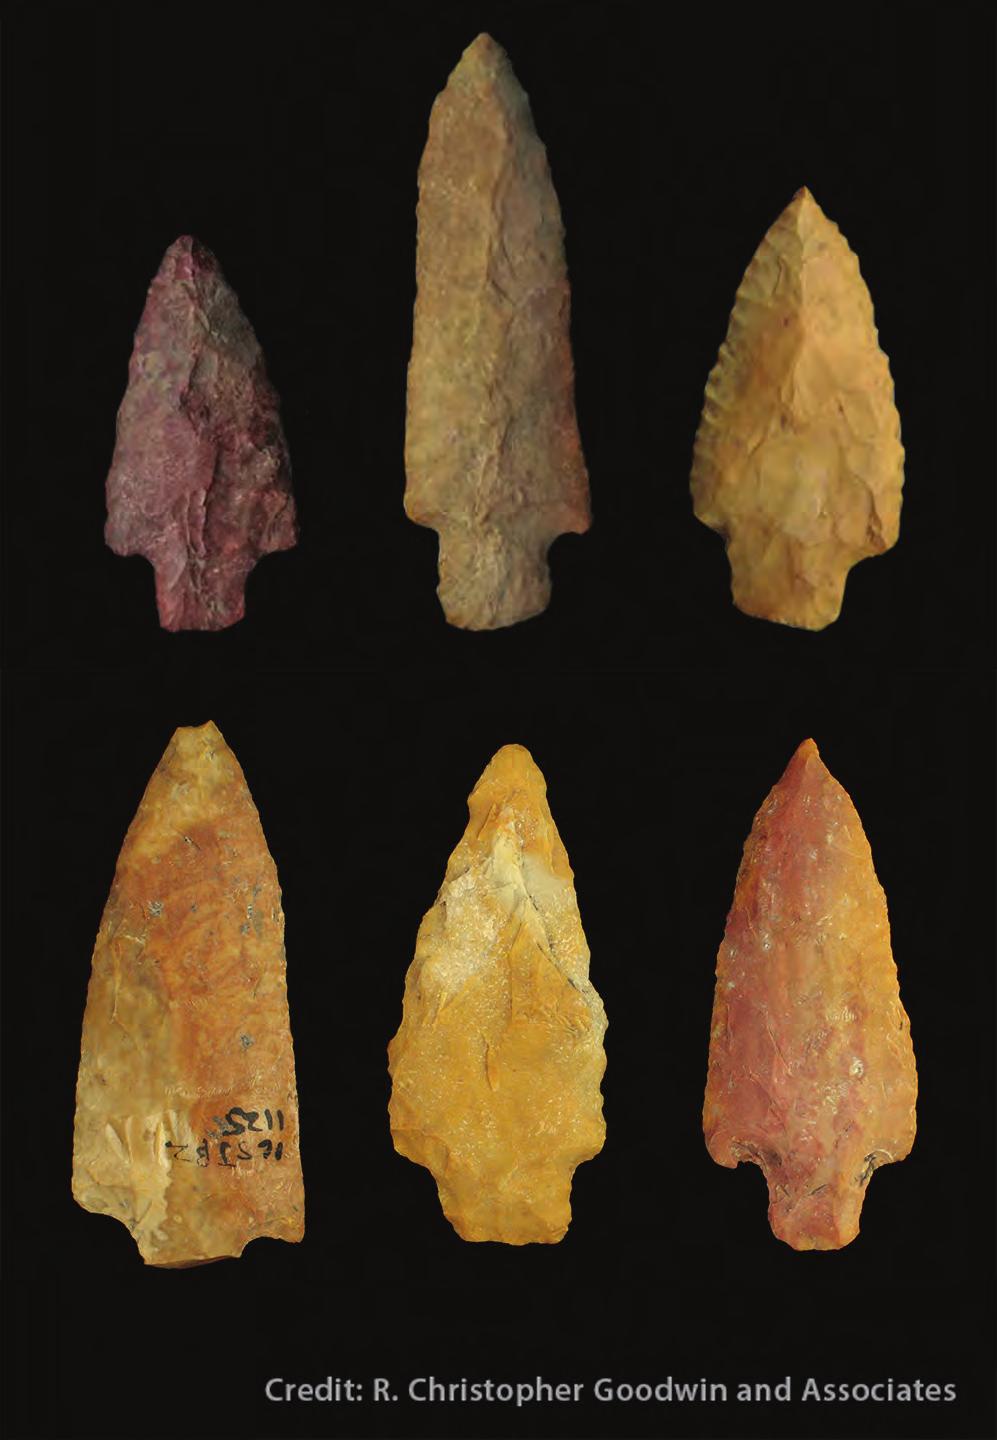 Most of these points were made of rock that was not from the site. This means people either traveled long distances to get stone or traded or exchanged with outsiders for stone or projectile points.